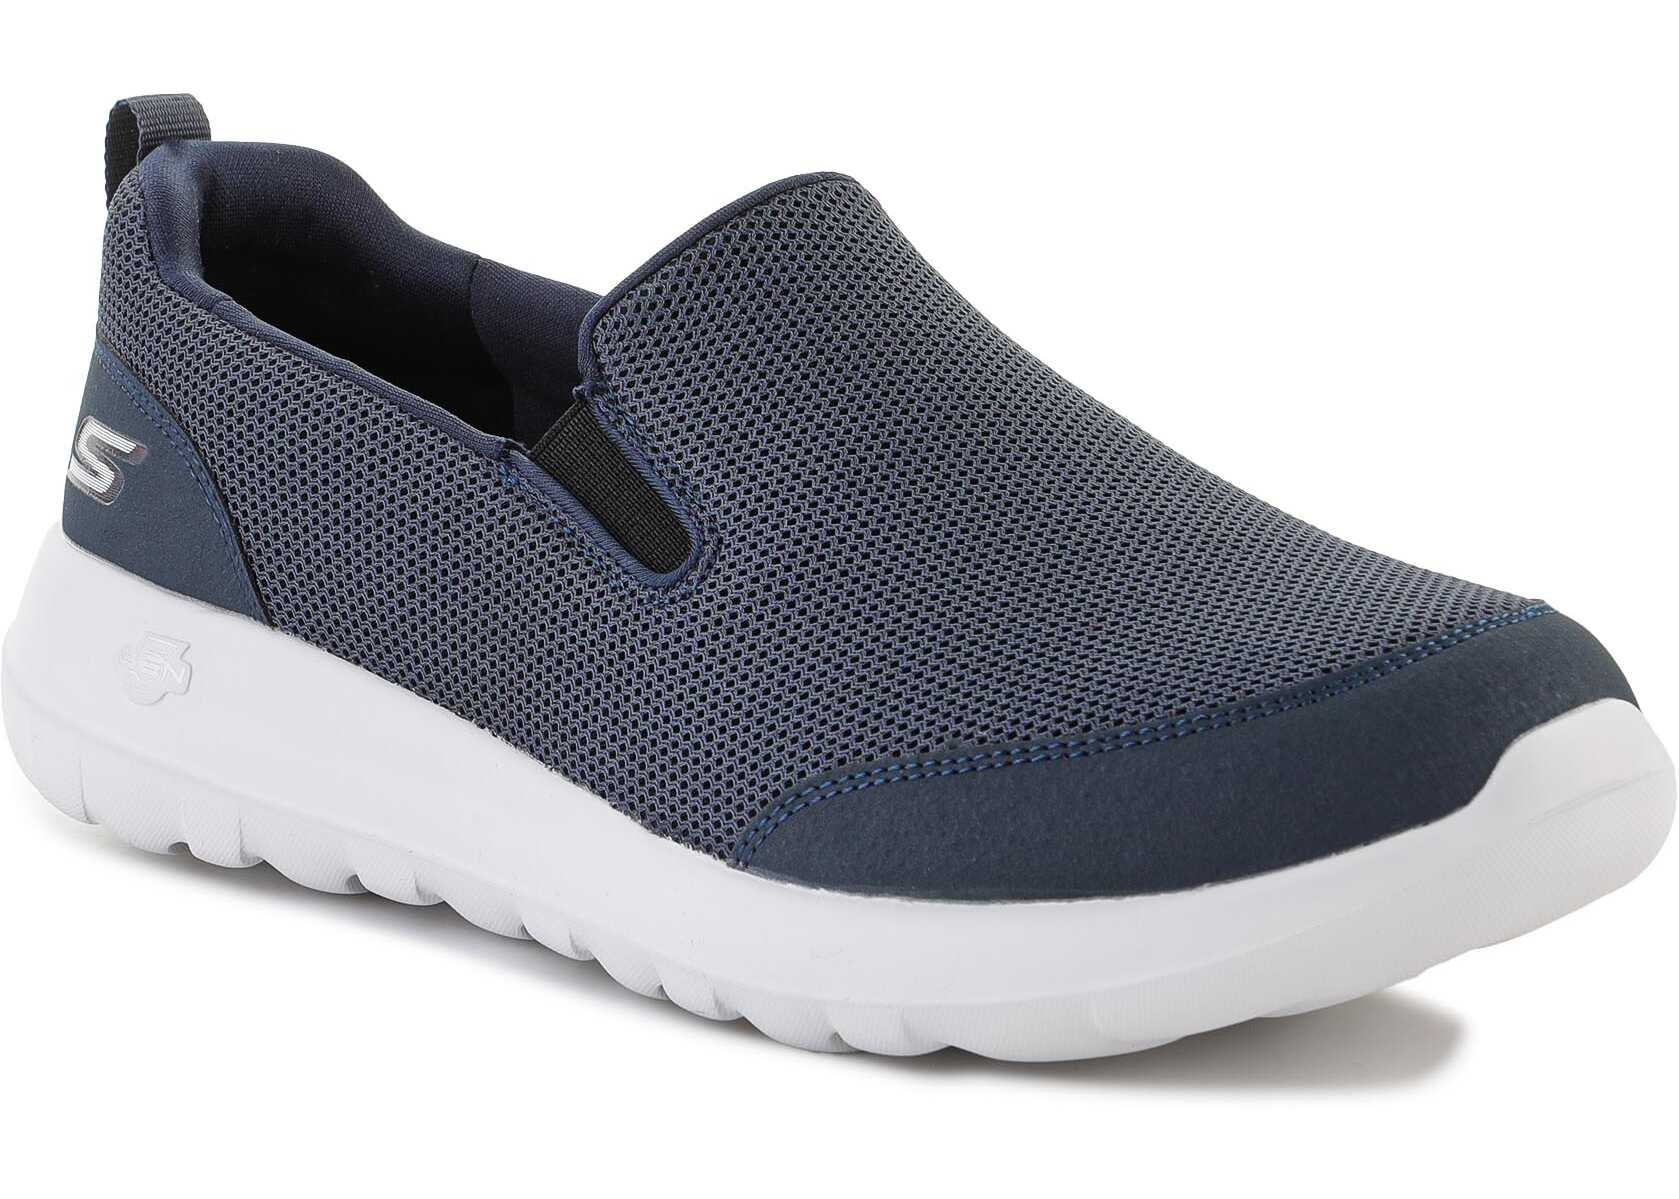 SKECHERS GO WALK MAX CLINCHED 216010 - NVY Navy